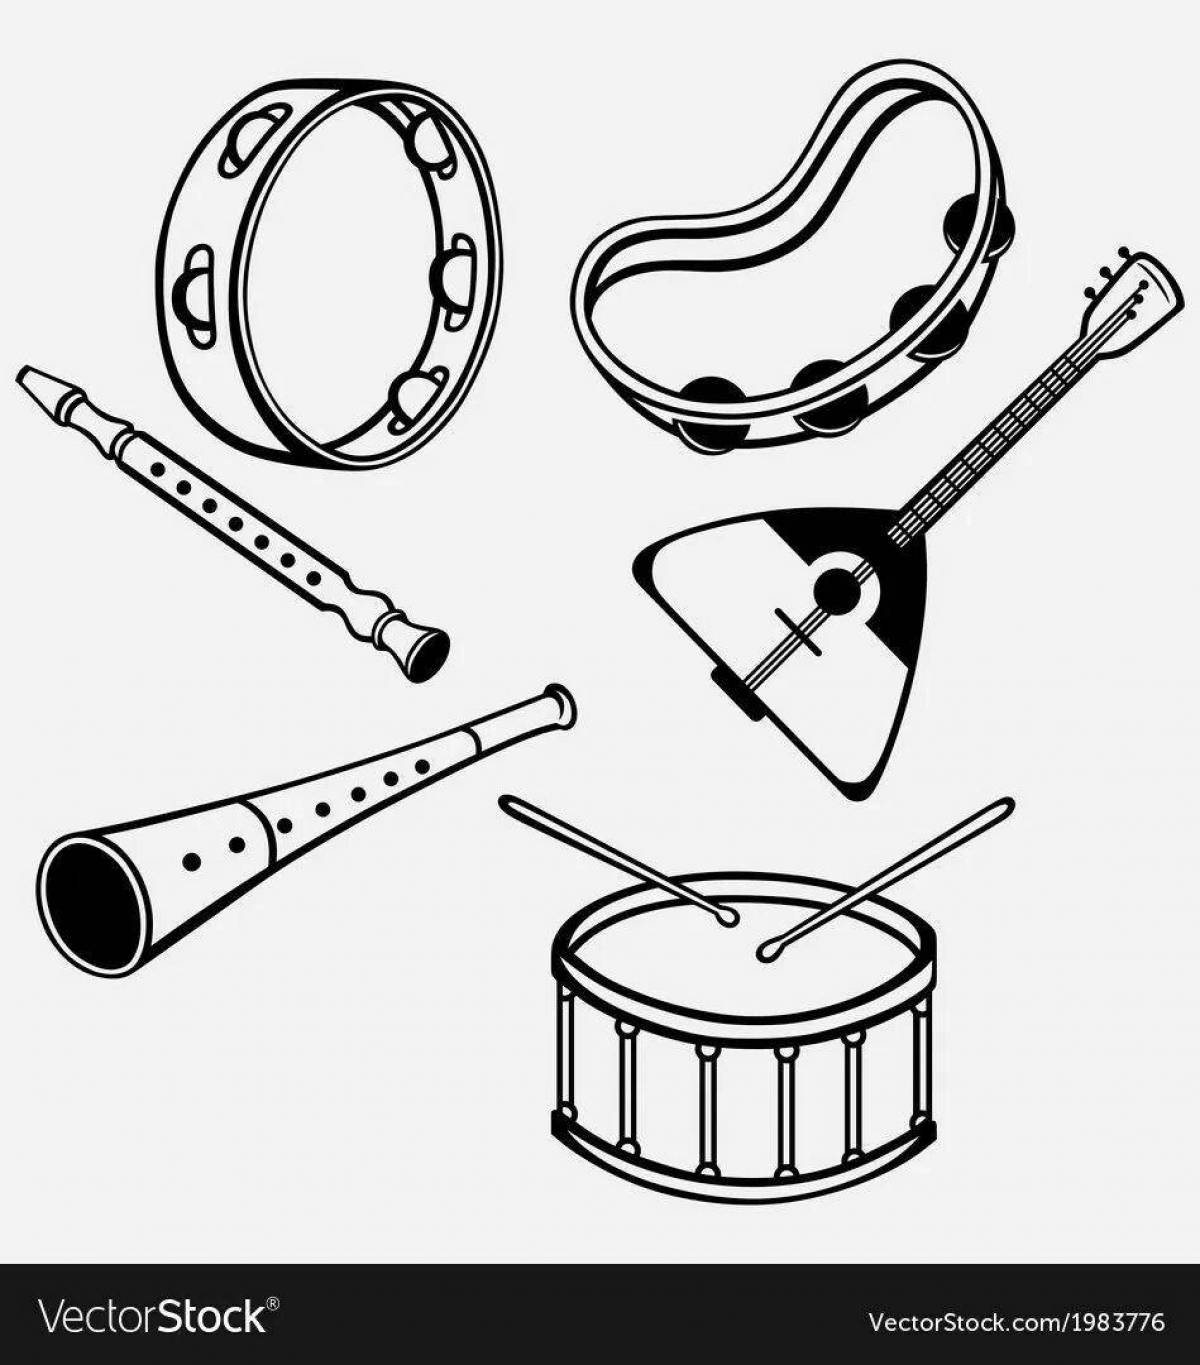 Fun coloring pages with Russian folk instruments for kids